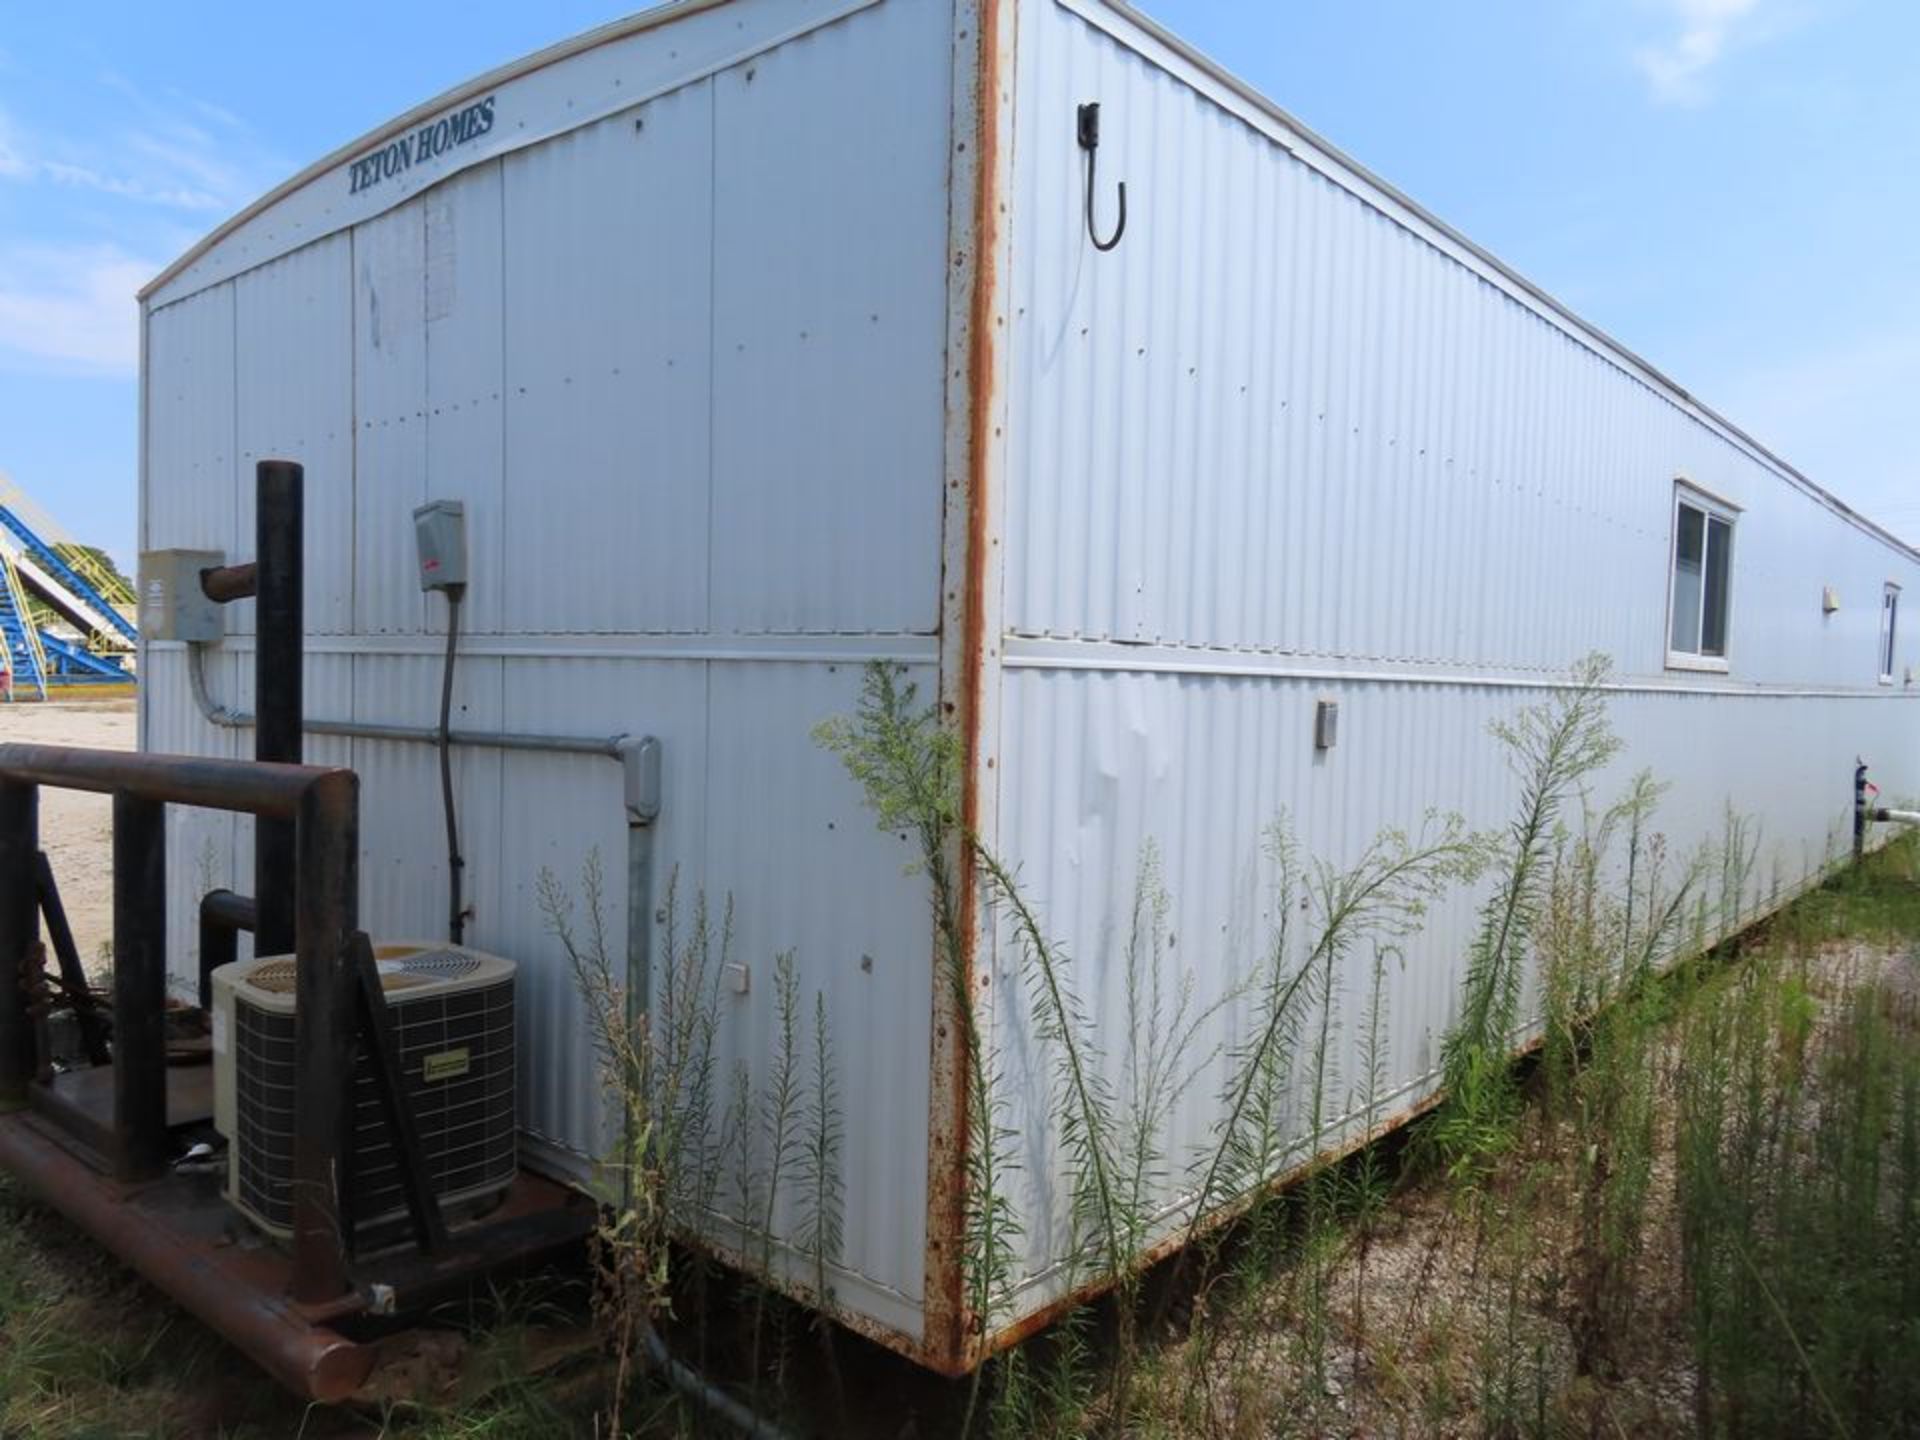 SKIDDED OFFICE BLDG., 13'-8" X 59'-6", w/CONTENTS - Image 2 of 14